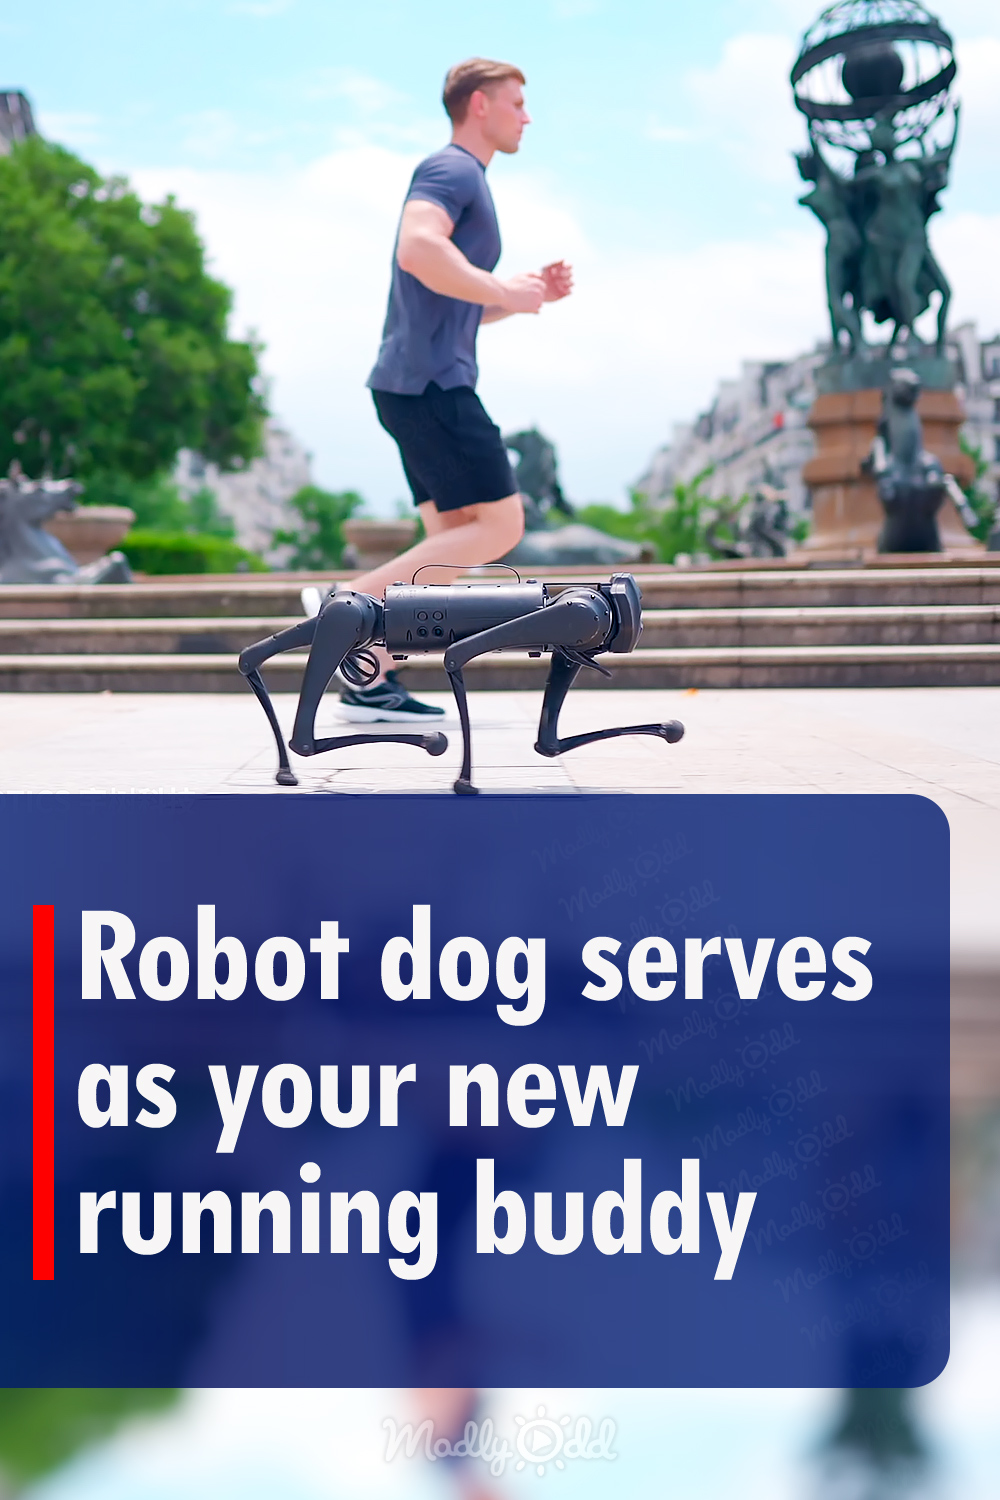 Robot dog serves as your new running buddy